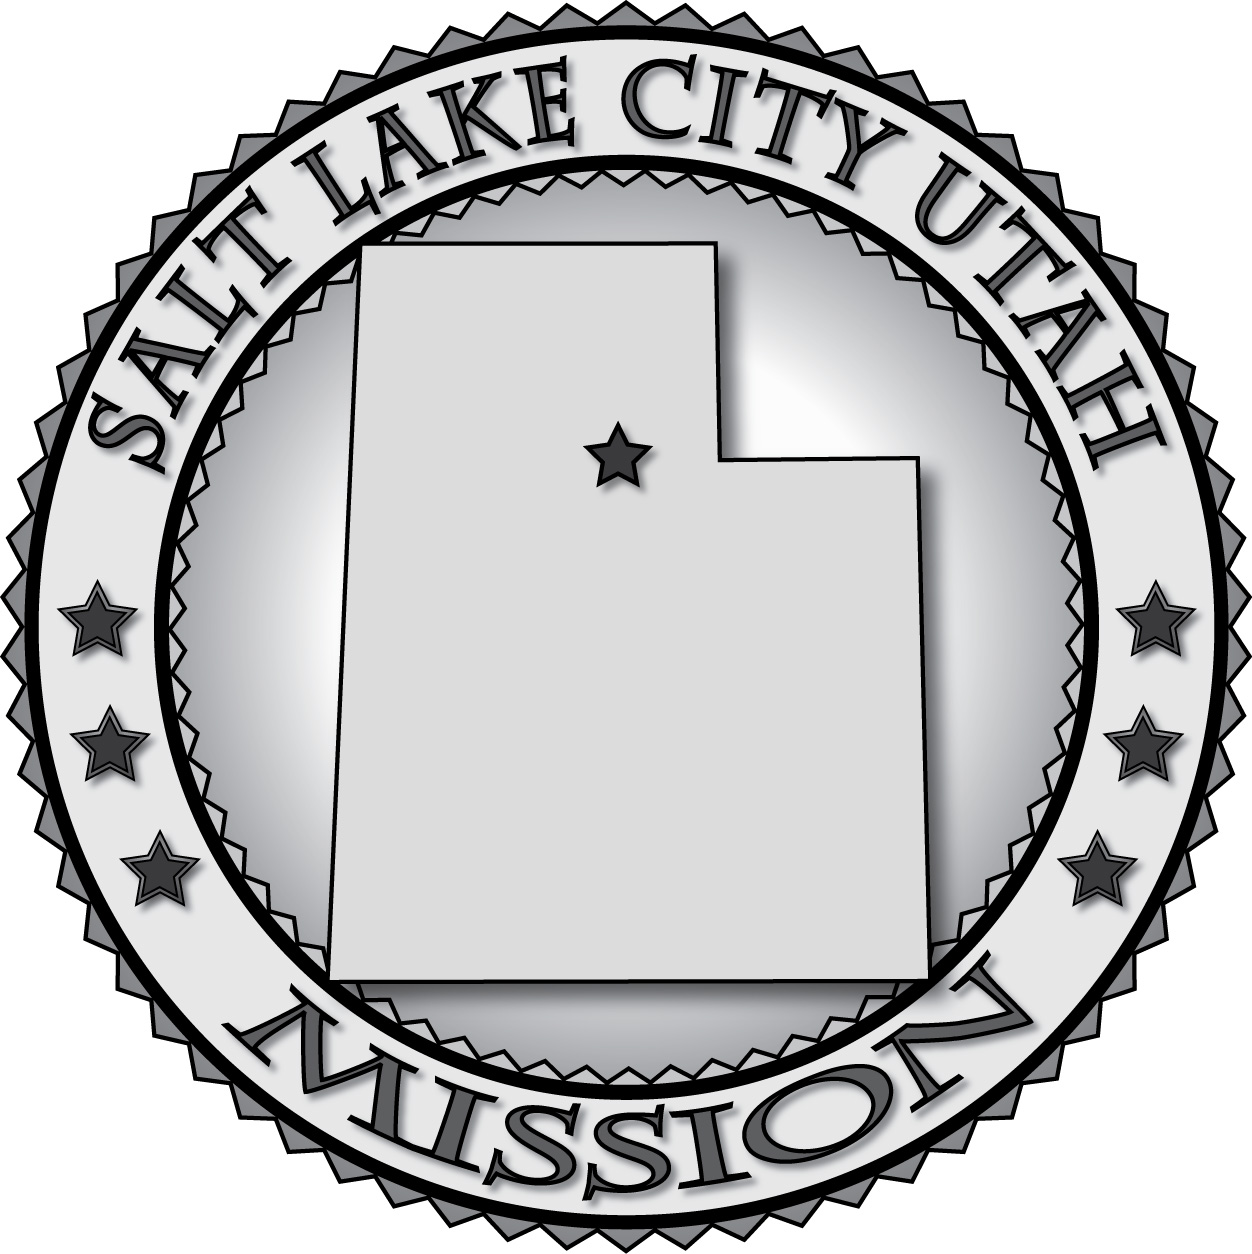 Utah – LDS Mission Medallions & Seals : My CTR Ring